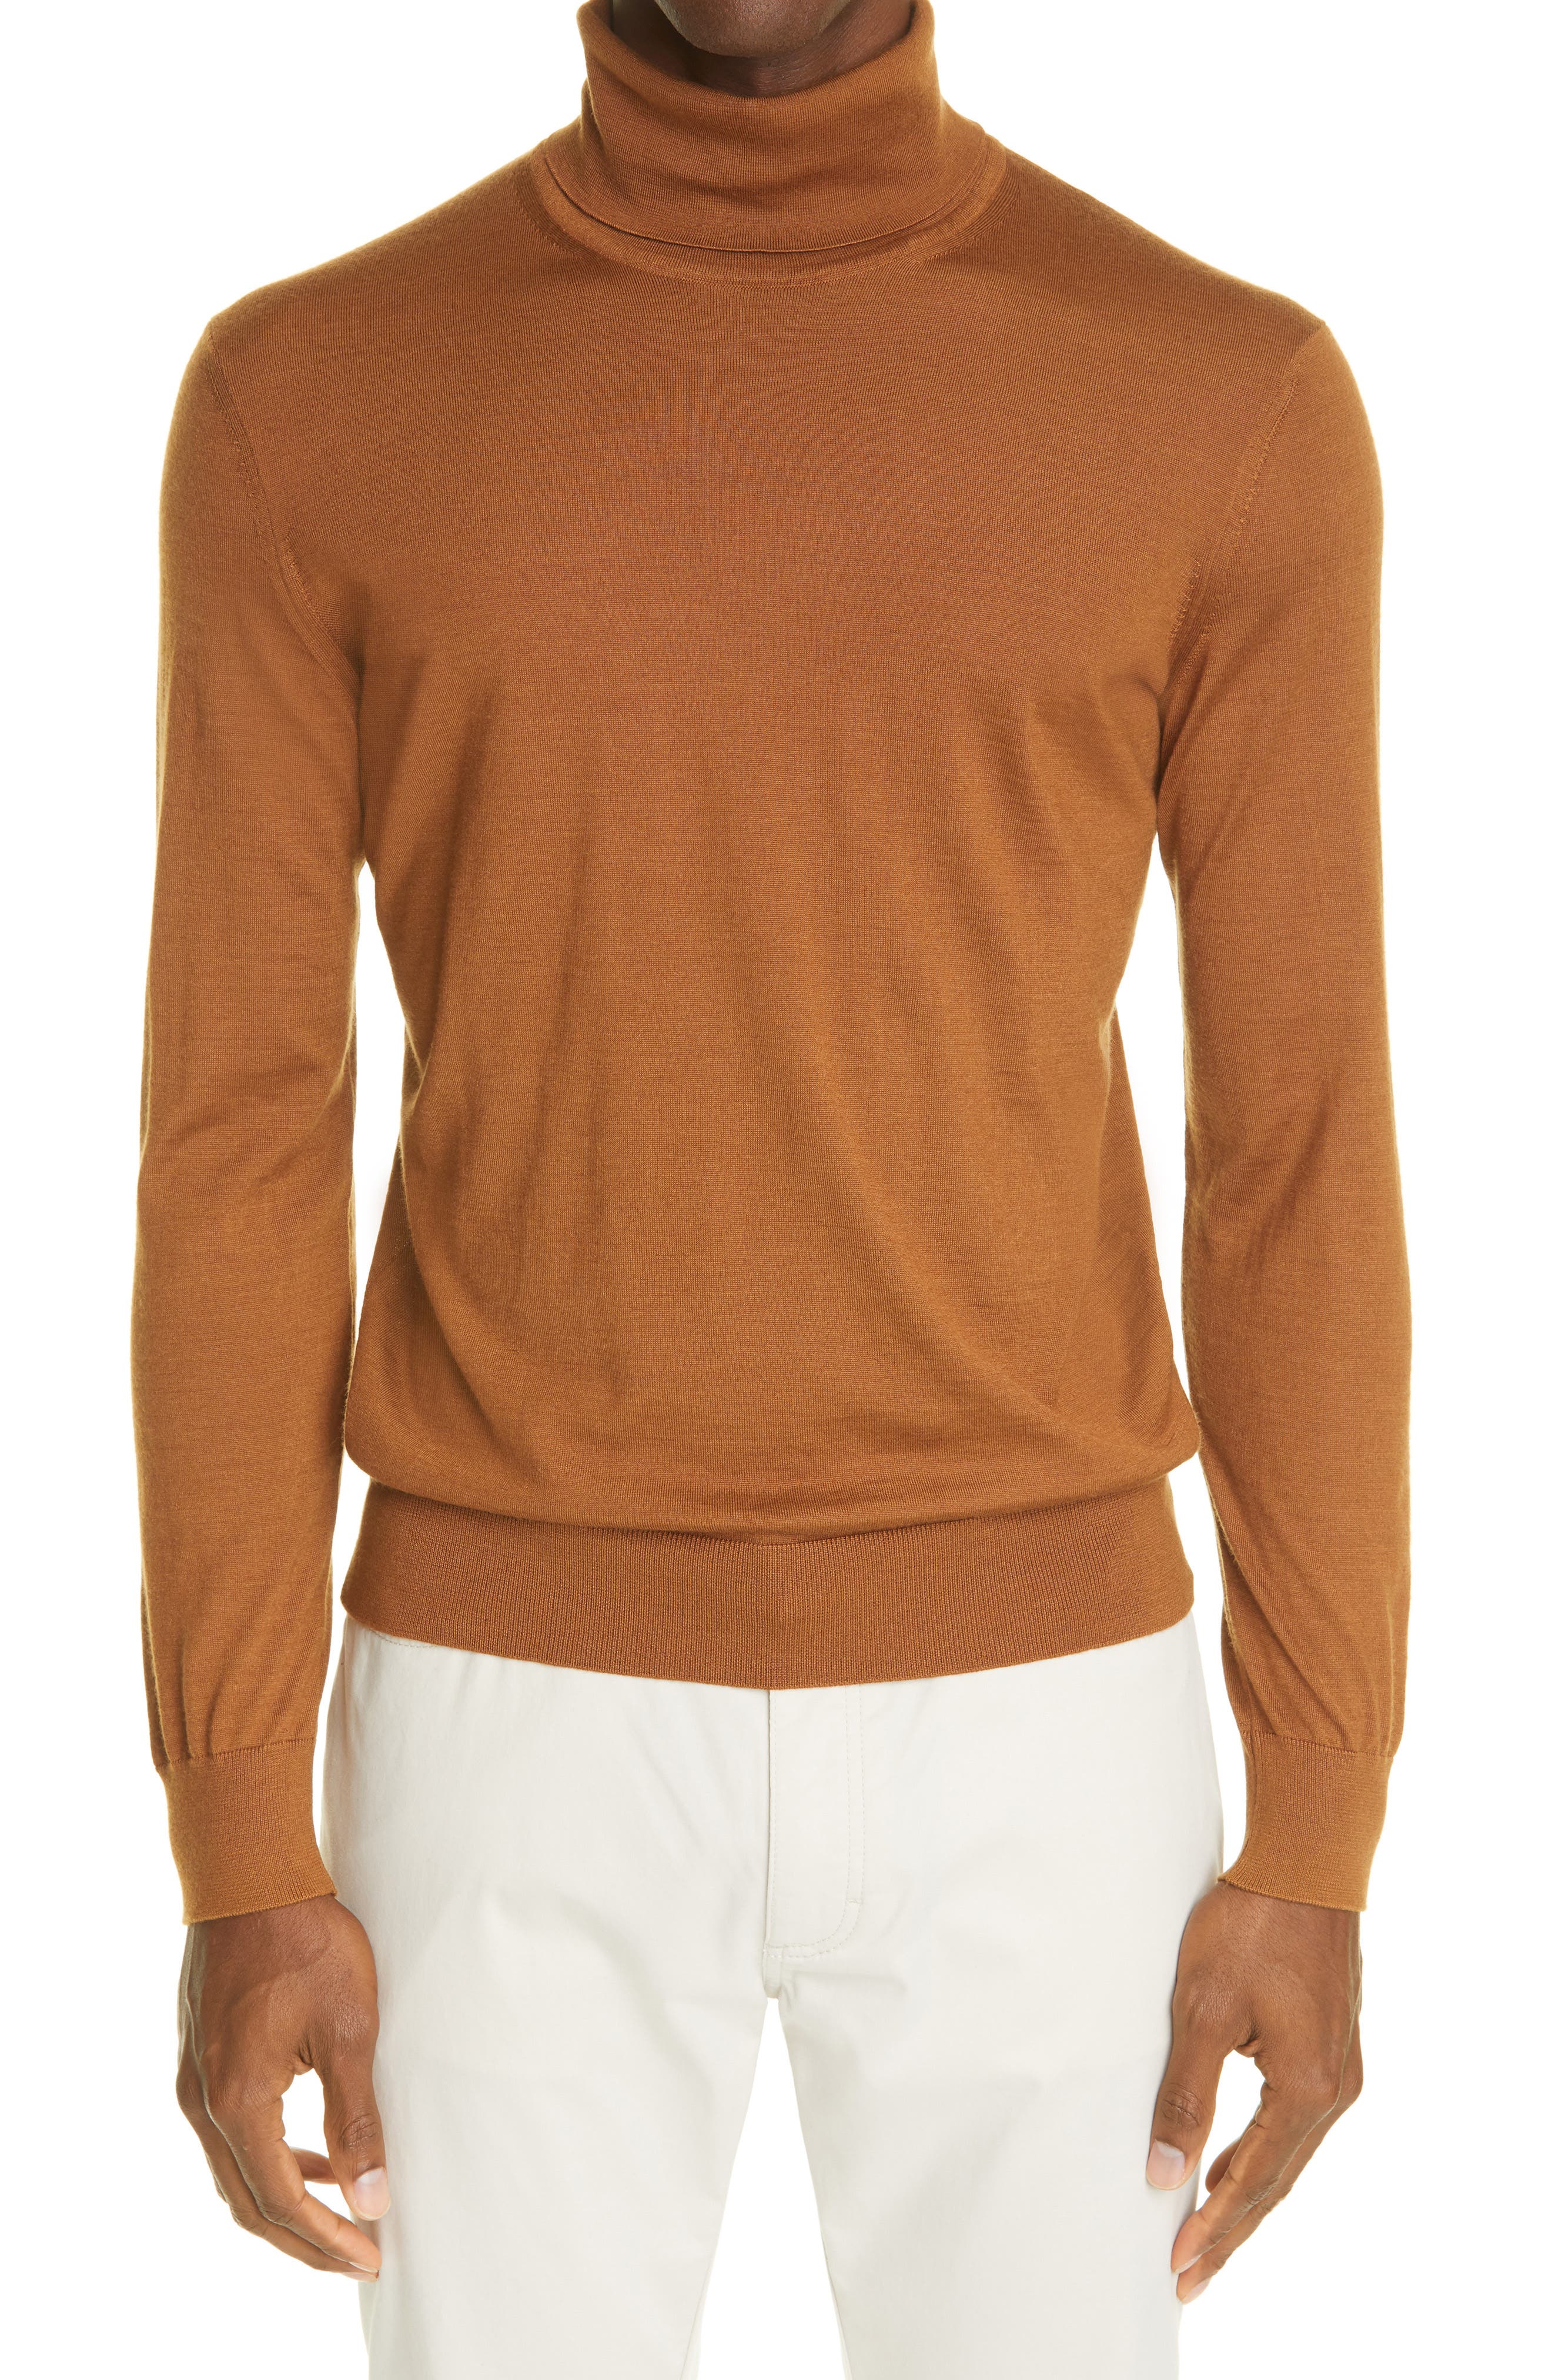 WSPLYSPJY Mens Slim Fit Turtleneck Casual Knitted Pullover Top Sweaters